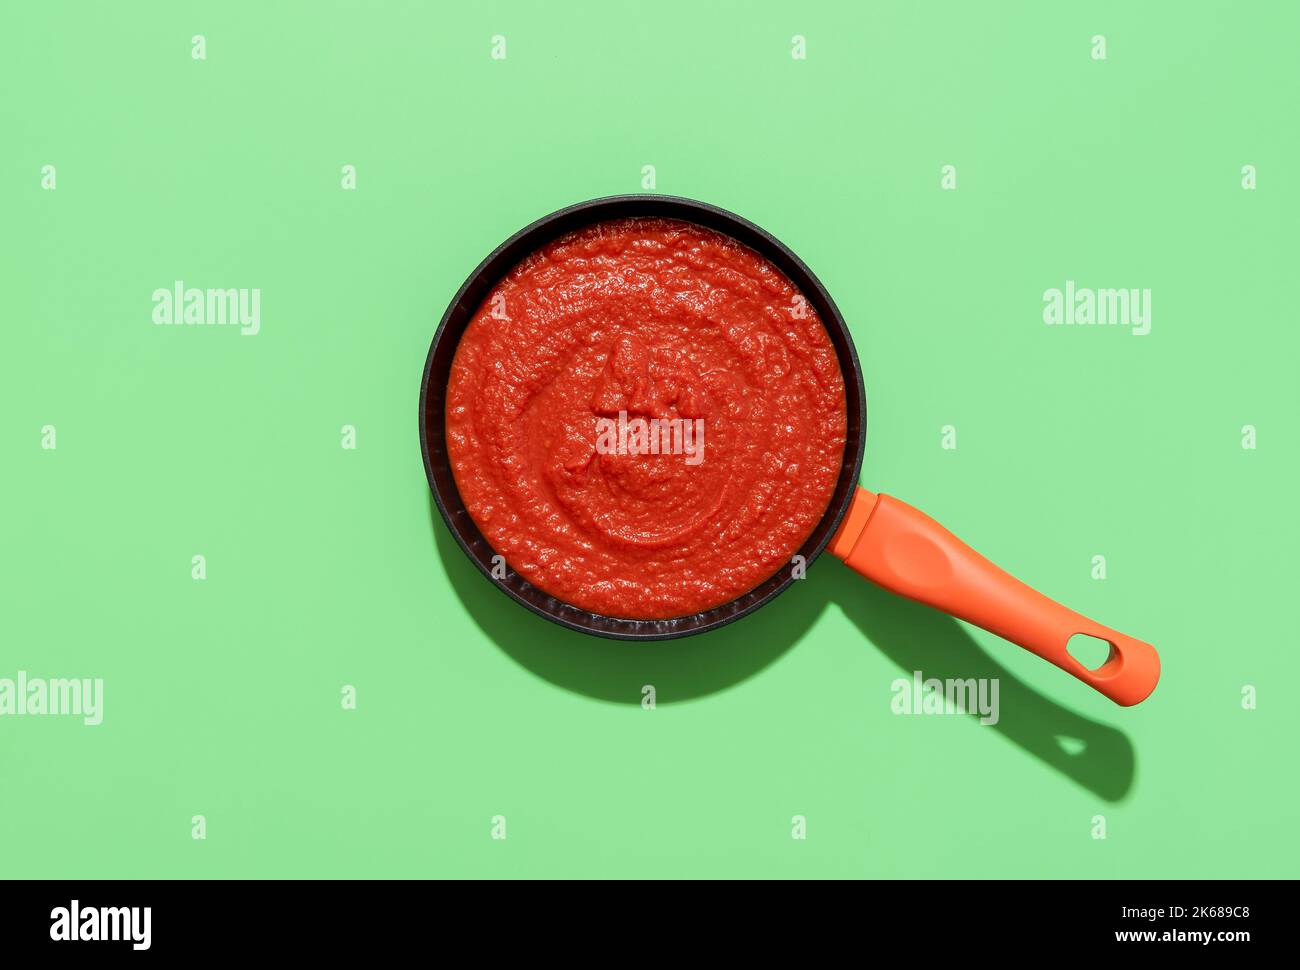 Above view with homemade tomato sauce in a pan on a green table. Traditional italian tomato sauce with garlic and basil for pasta or pizza, Stock Photo